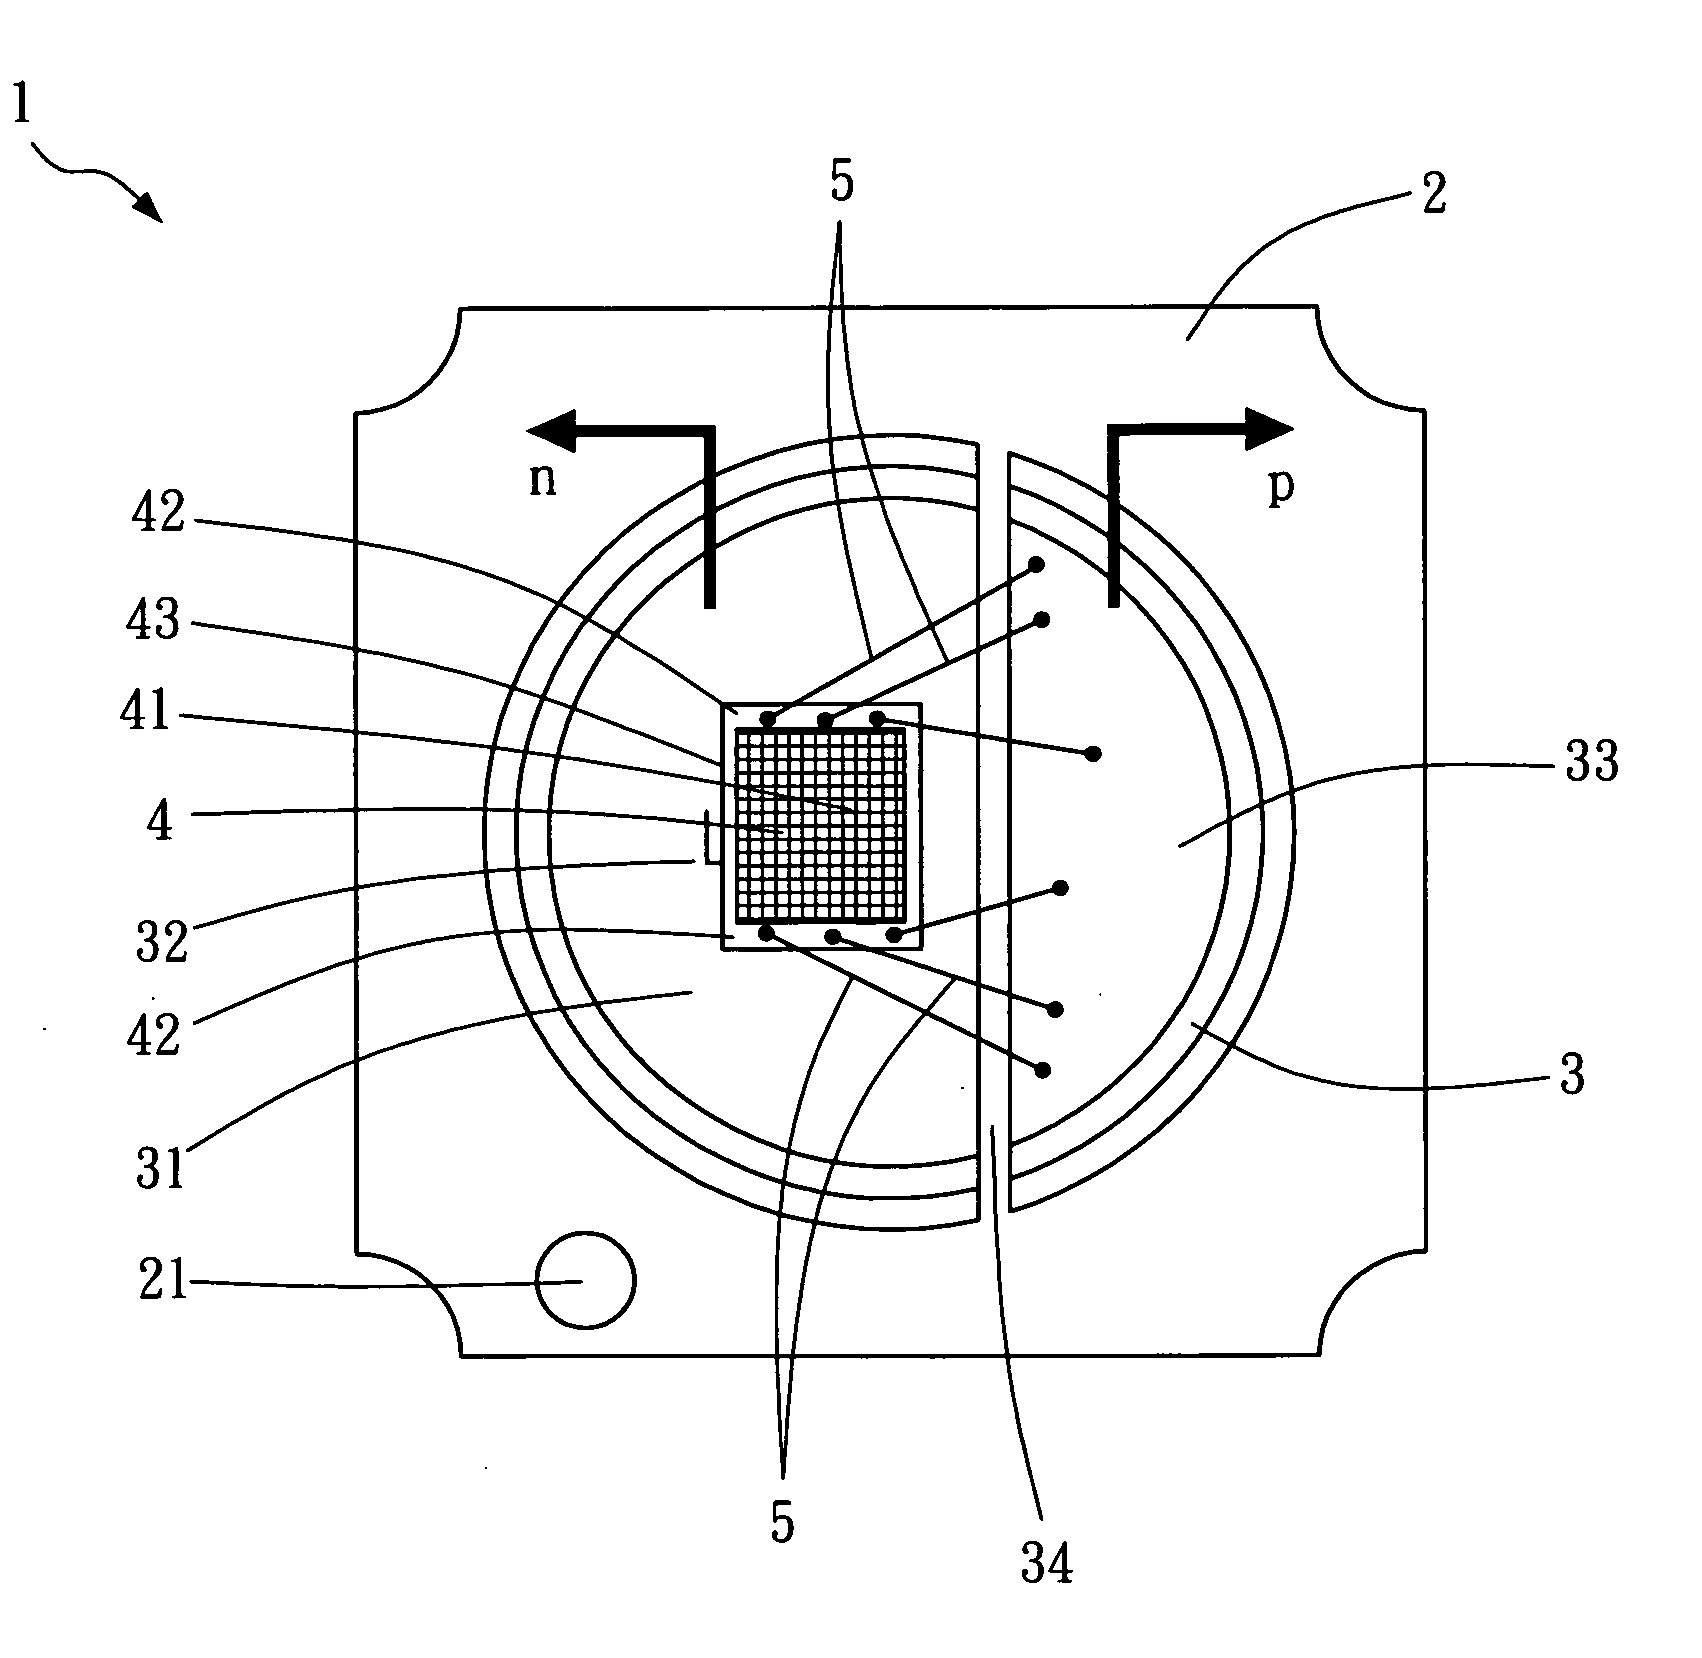 Packaging device for matrix-arrayed semiconductor light-emitting elements of high power and high directivity